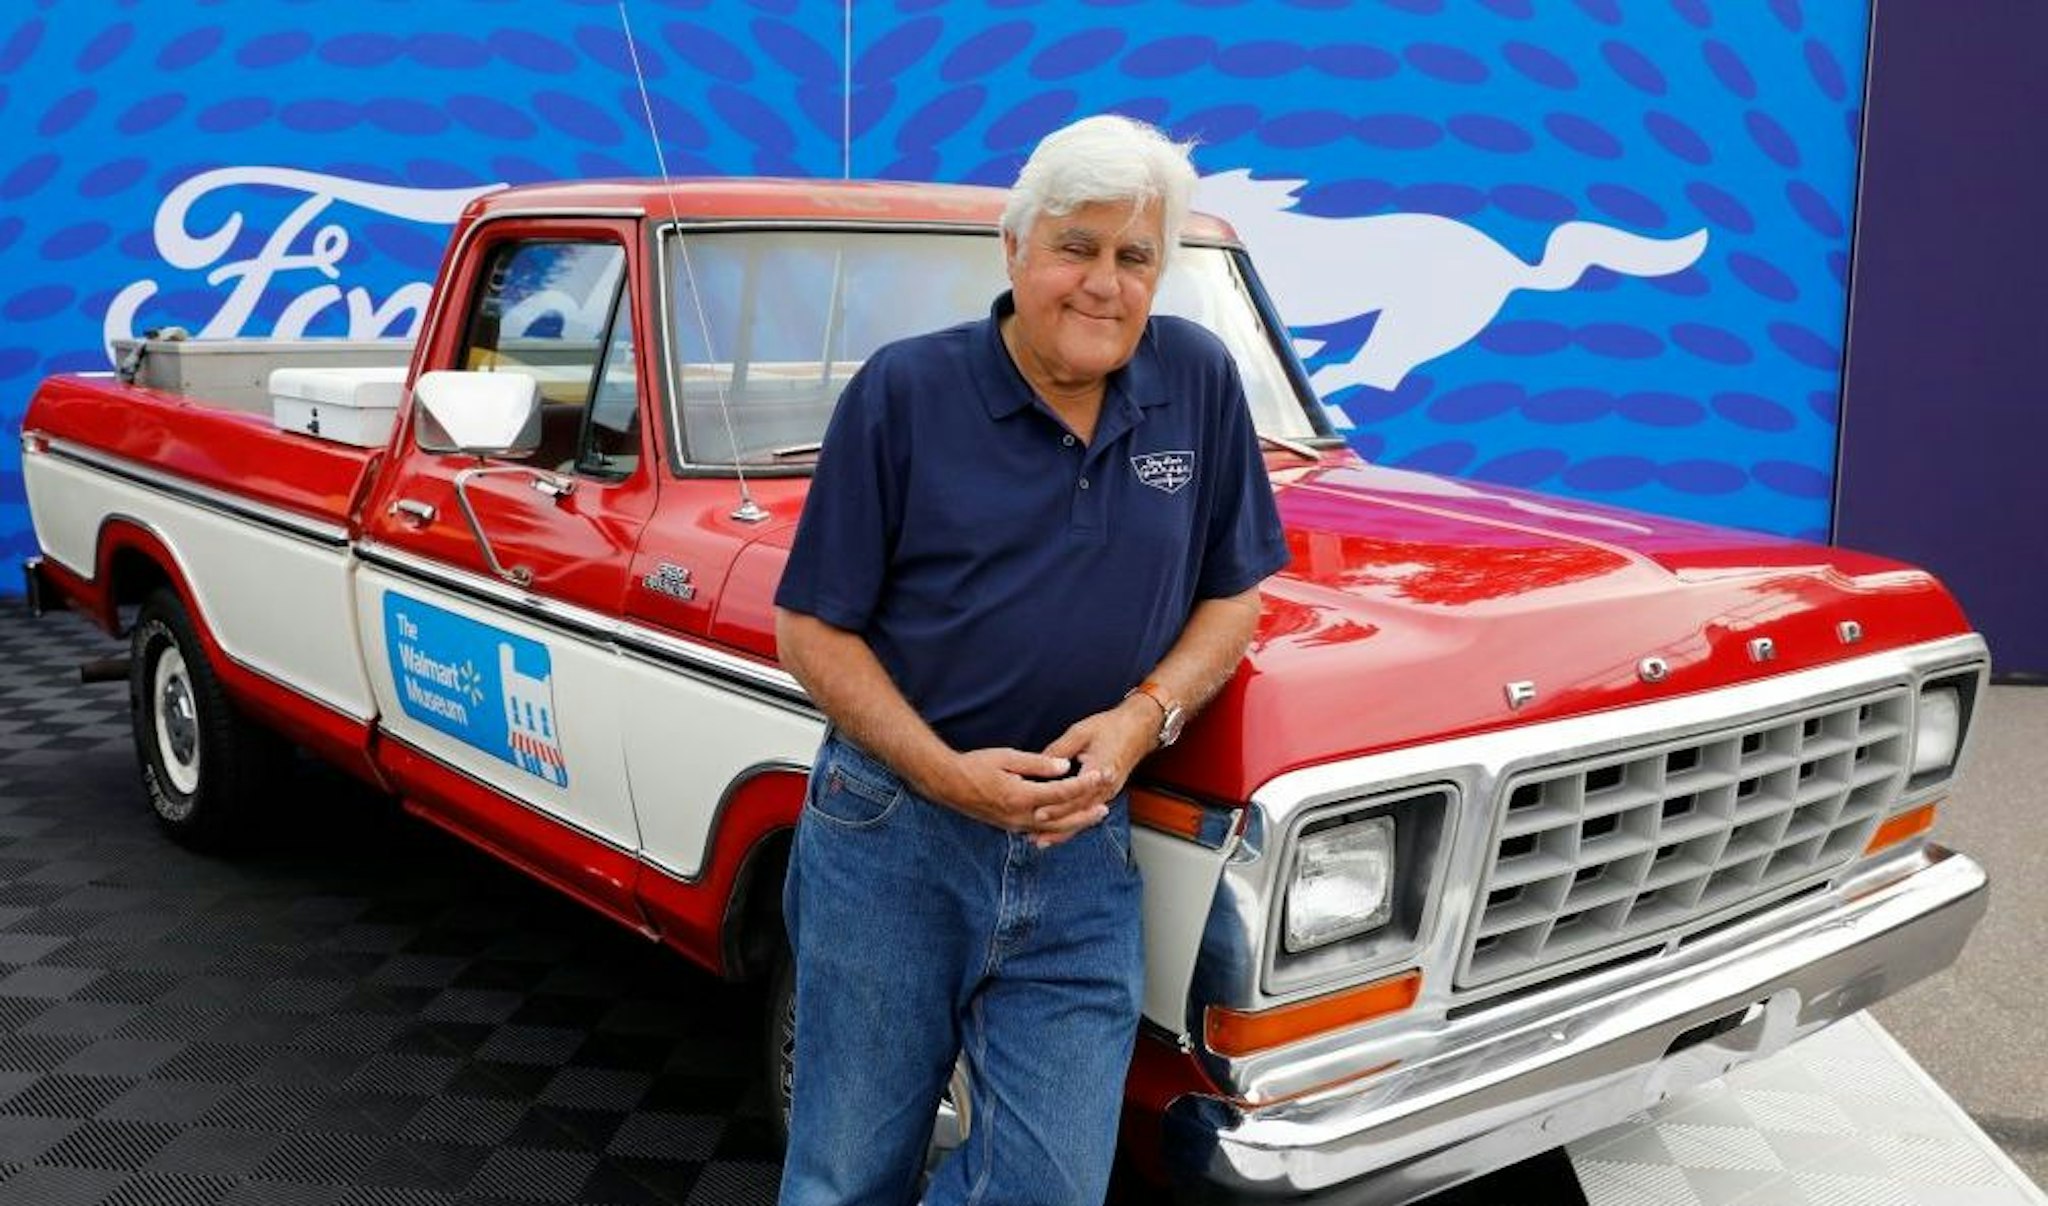 US comedian Jay Leno poses in front of a 1979 Ford F-150 pickup, in the style of one owned by Walmart founder Sam Walton, on August 20, 2022, during the 27th annual Woodward Dream Cruise, in Royal Oak, Michigan. - The event is a celebration of automotive culture, attracting nearly one-million visitors and thousands of classic vehicles.